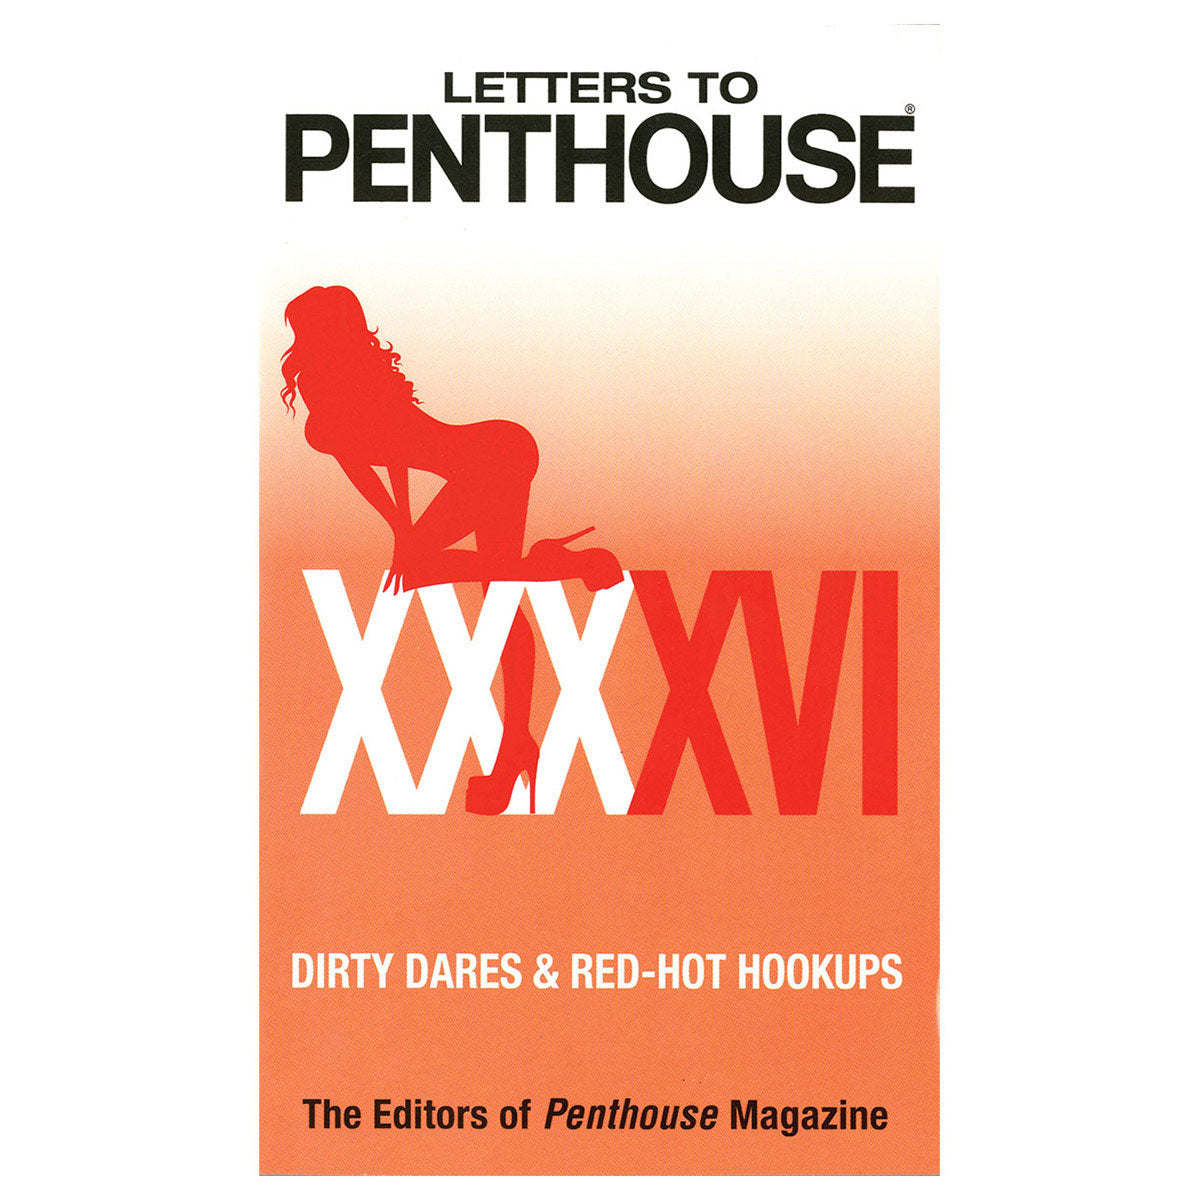 Letters to Penthouse XXXXVI - Dirty Dares & Red-Hot Hookups - Grand Central Publishing